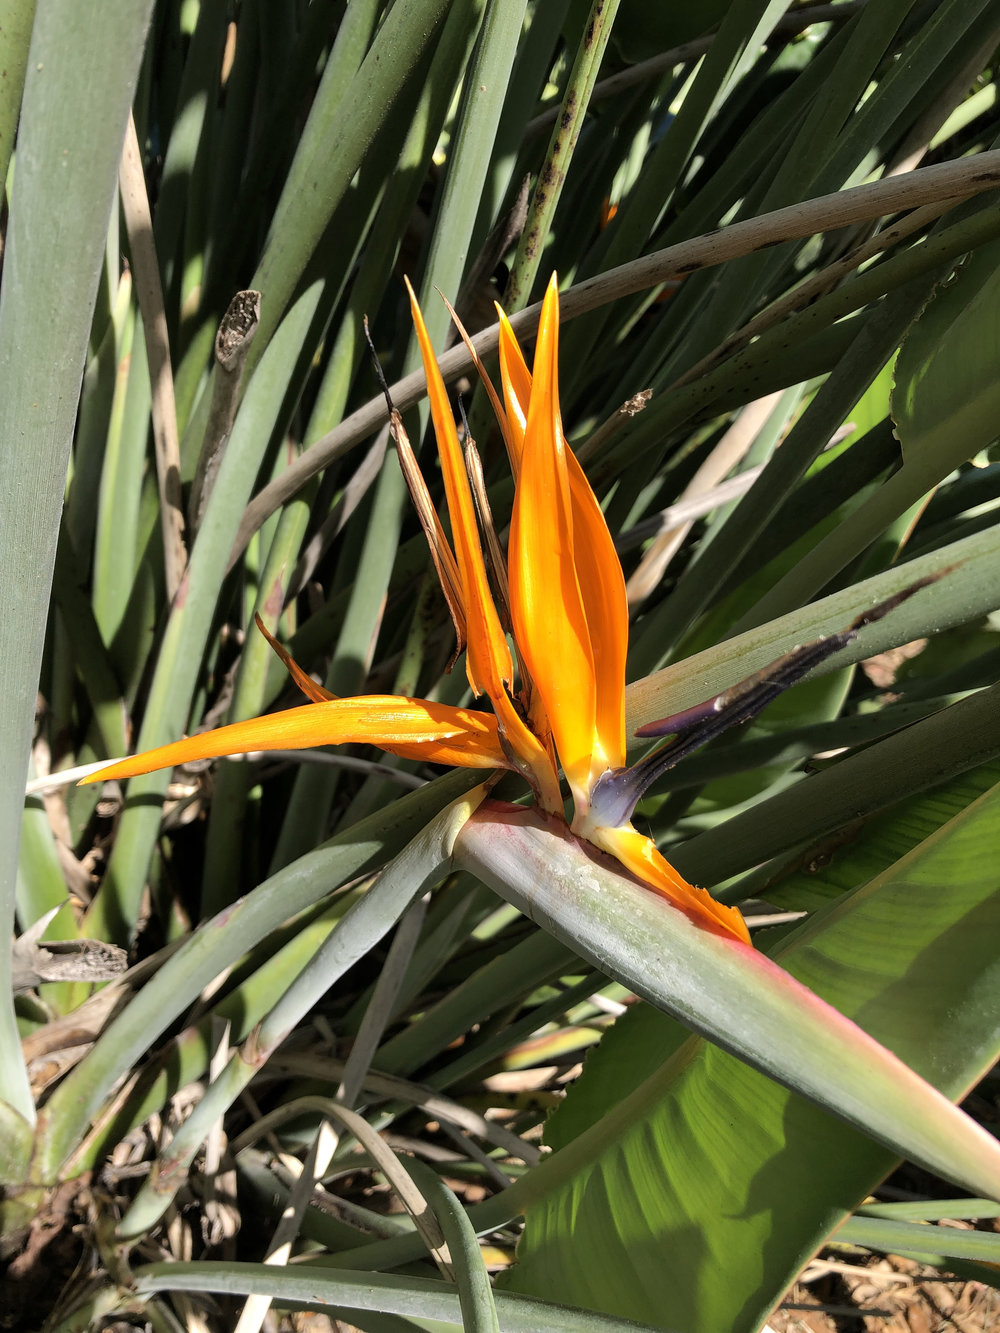   Strelitzia reginae  The bird of paradise, a widely cultivated plant, named so for its resemblance to the head and beak of a colorful exotic bird. 